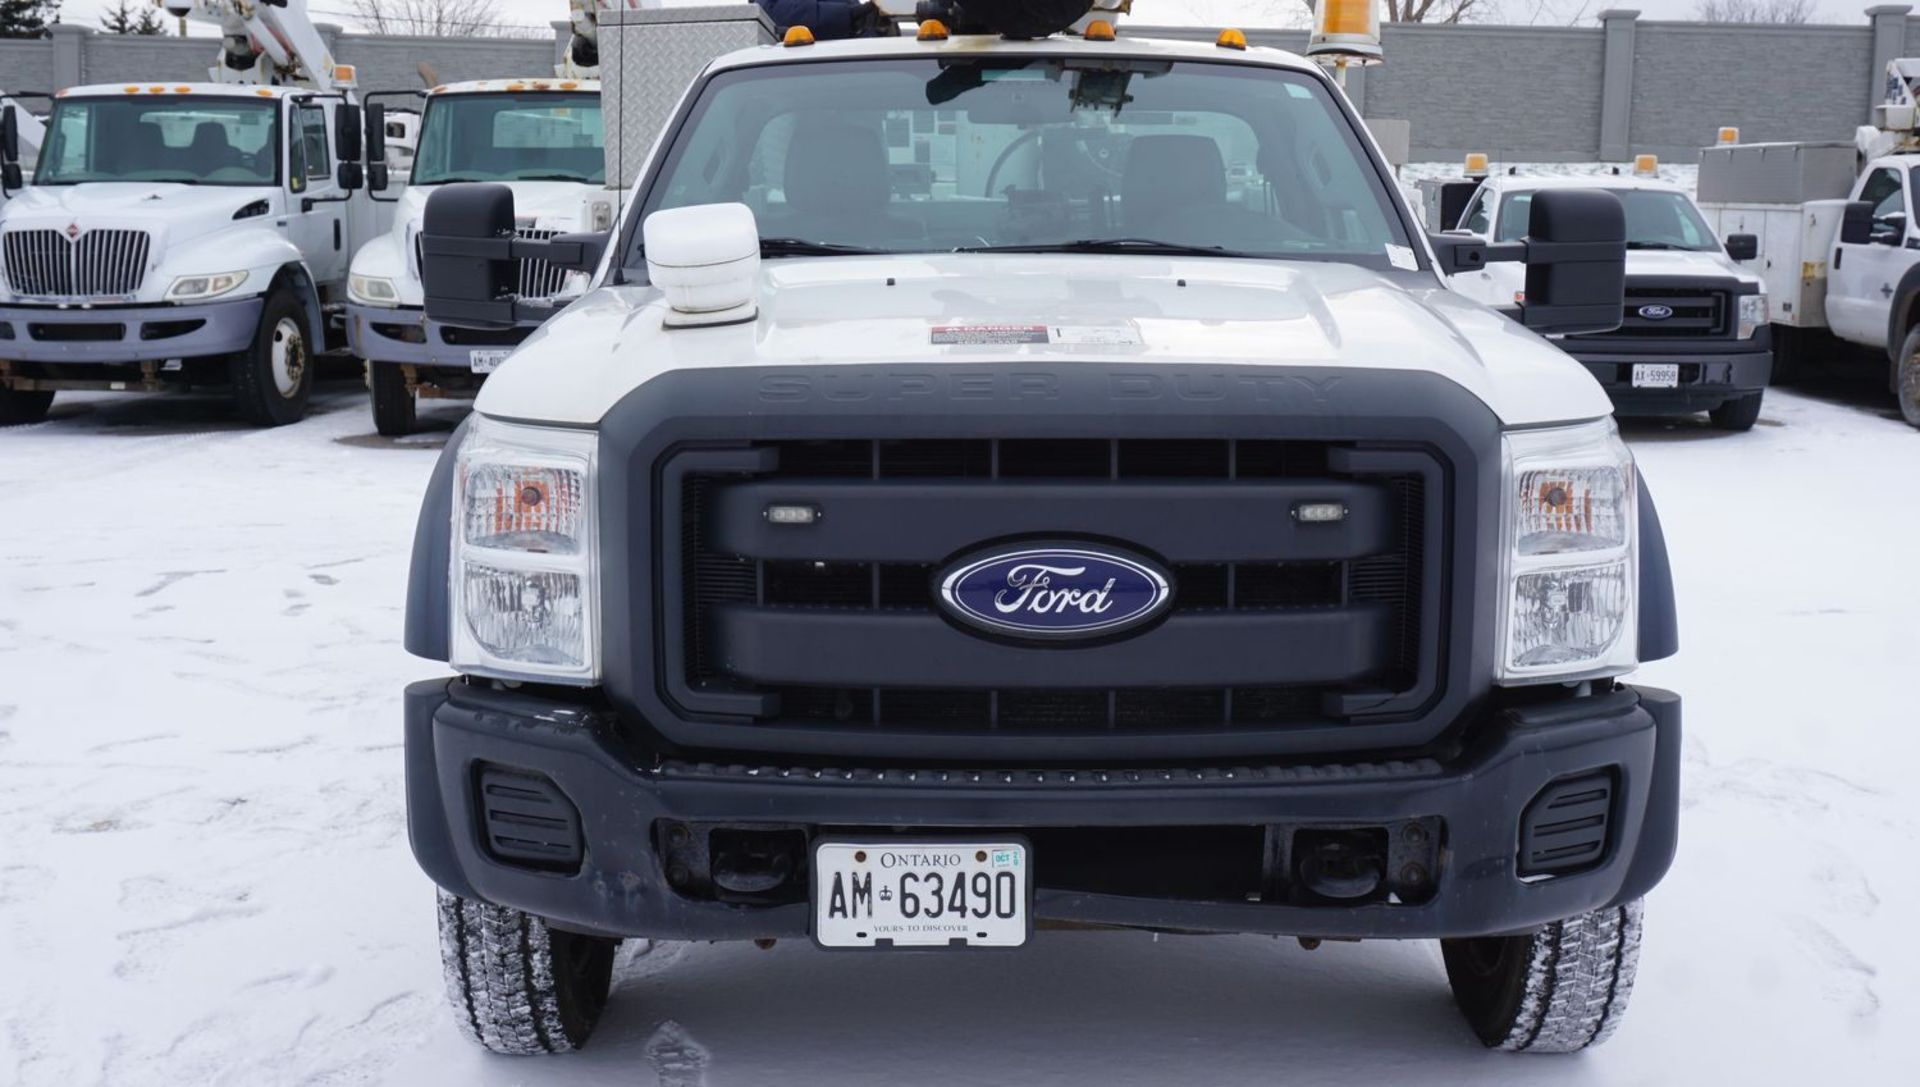 2015 ALTEC AT37G ARTICULATING TELESCOPIC BOOM & BUCKET MOUNTED ON 2015 FORD F550XL SUPER DUTY 4X4 - Image 3 of 18